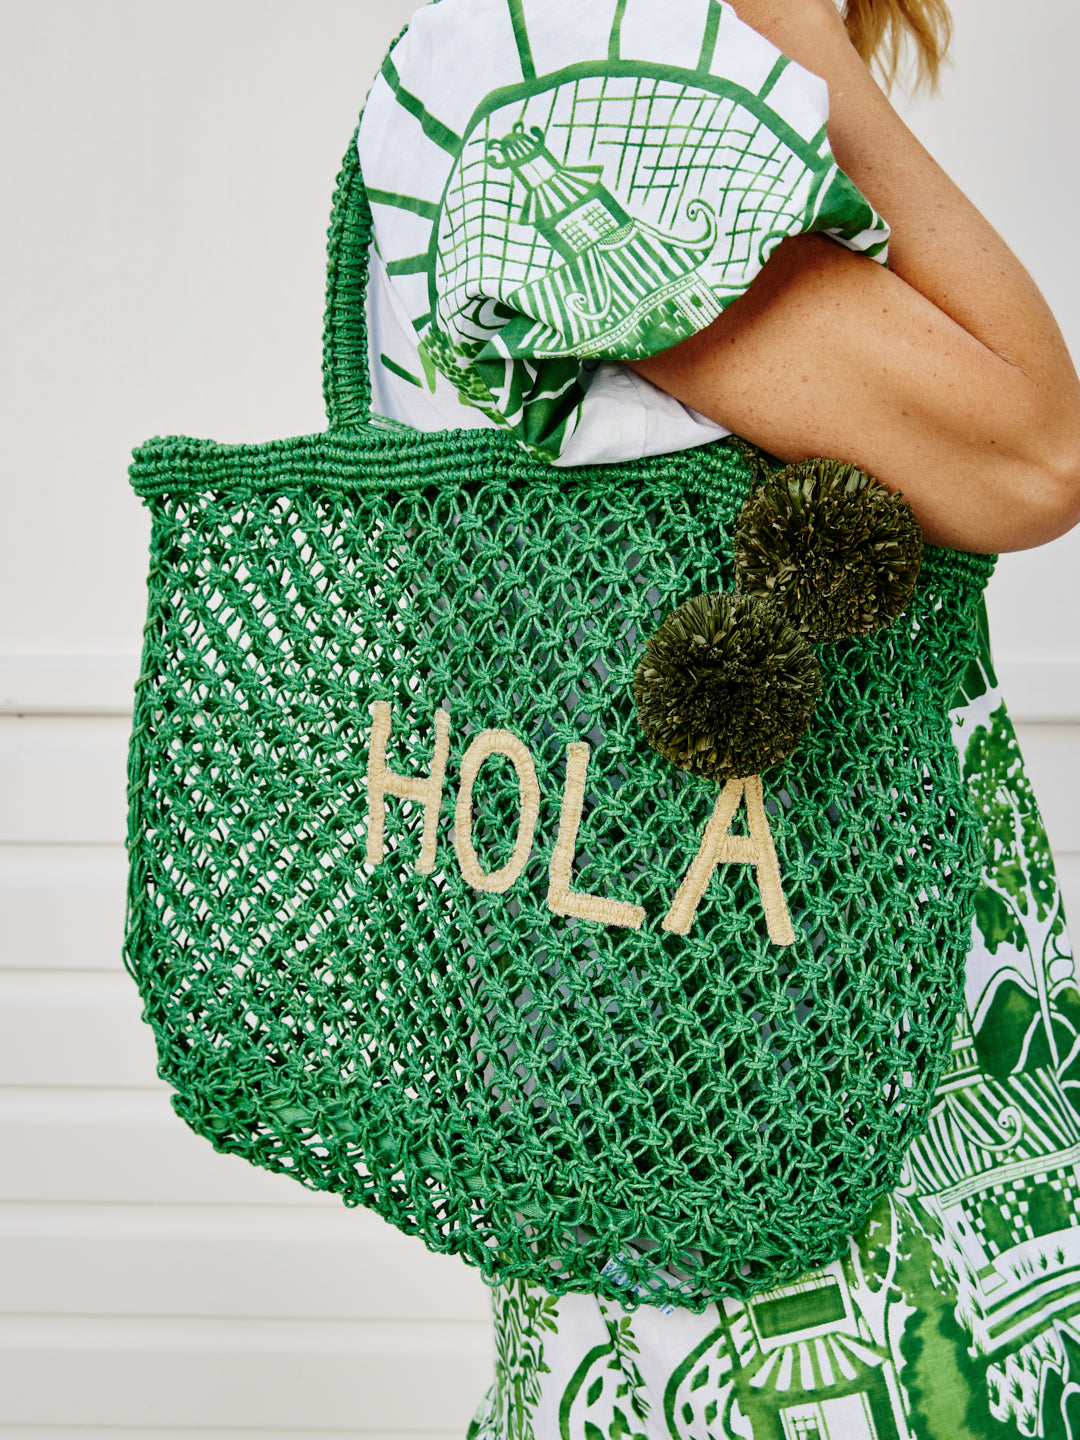 Macramé Tote - Hola with Green Poms